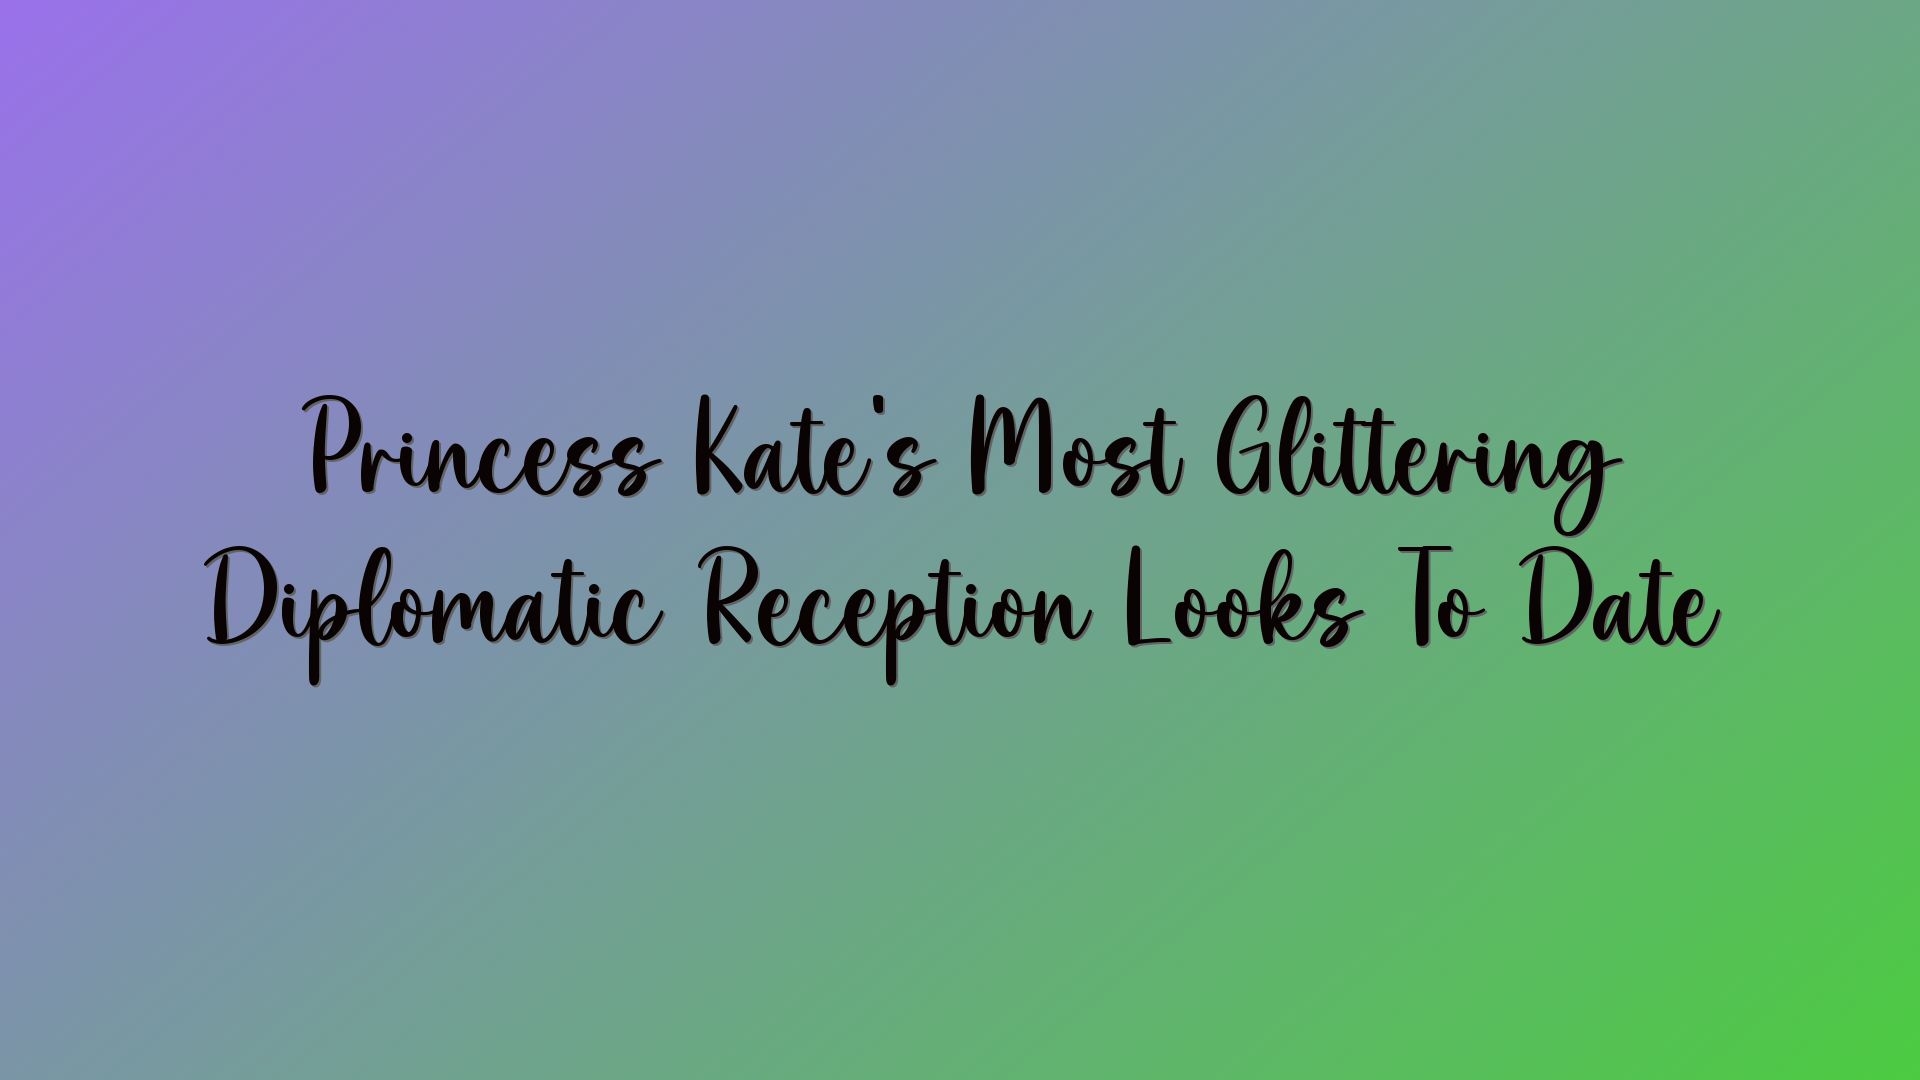 Princess Kate’s Most Glittering Diplomatic Reception Looks To Date